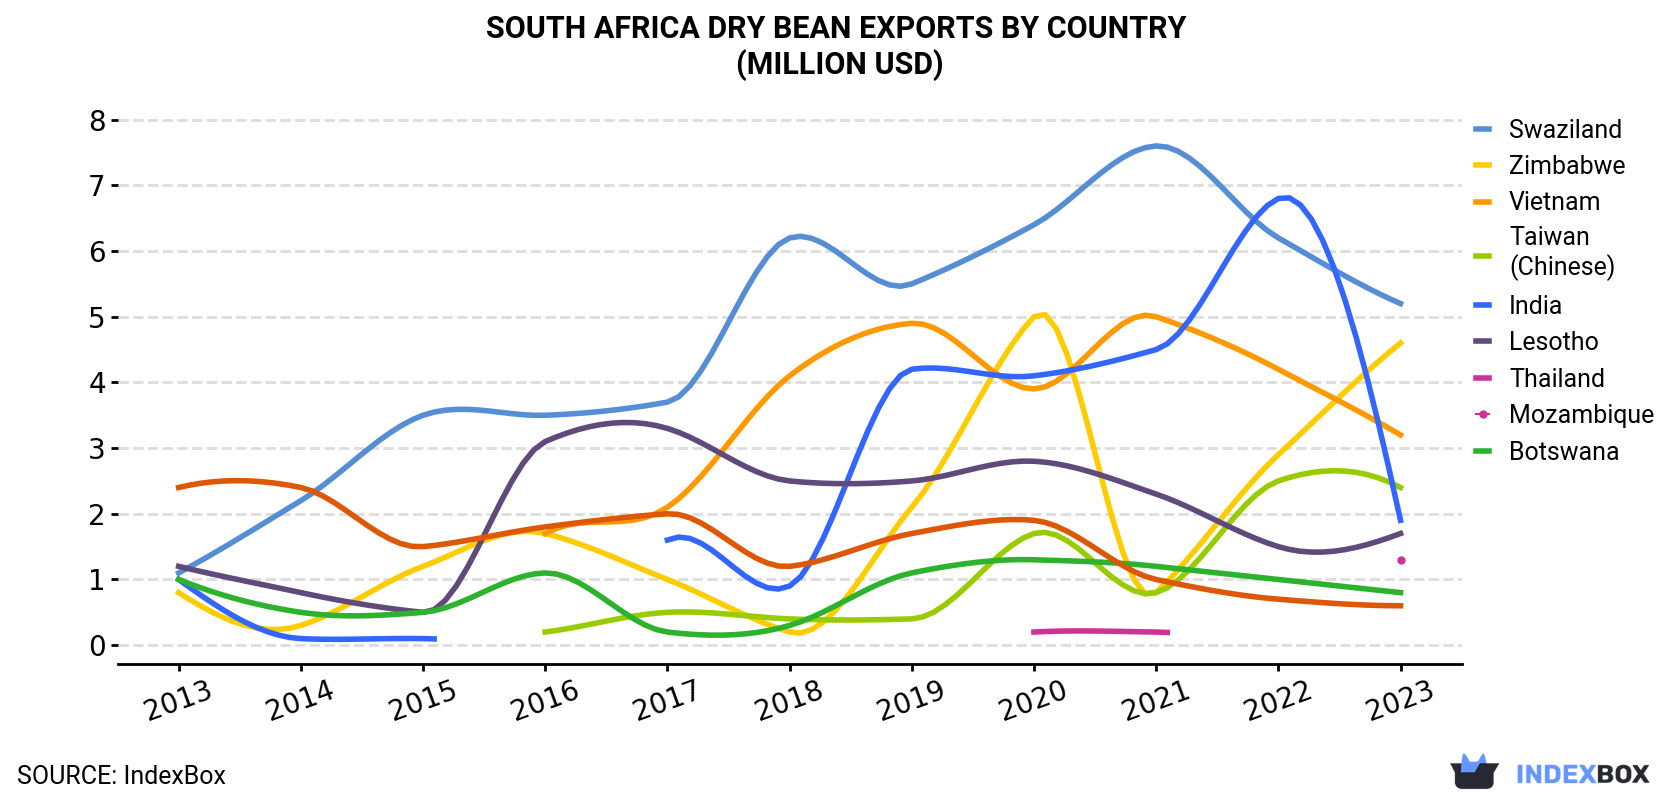 South Africa Dry Bean Exports By Country (Million USD)